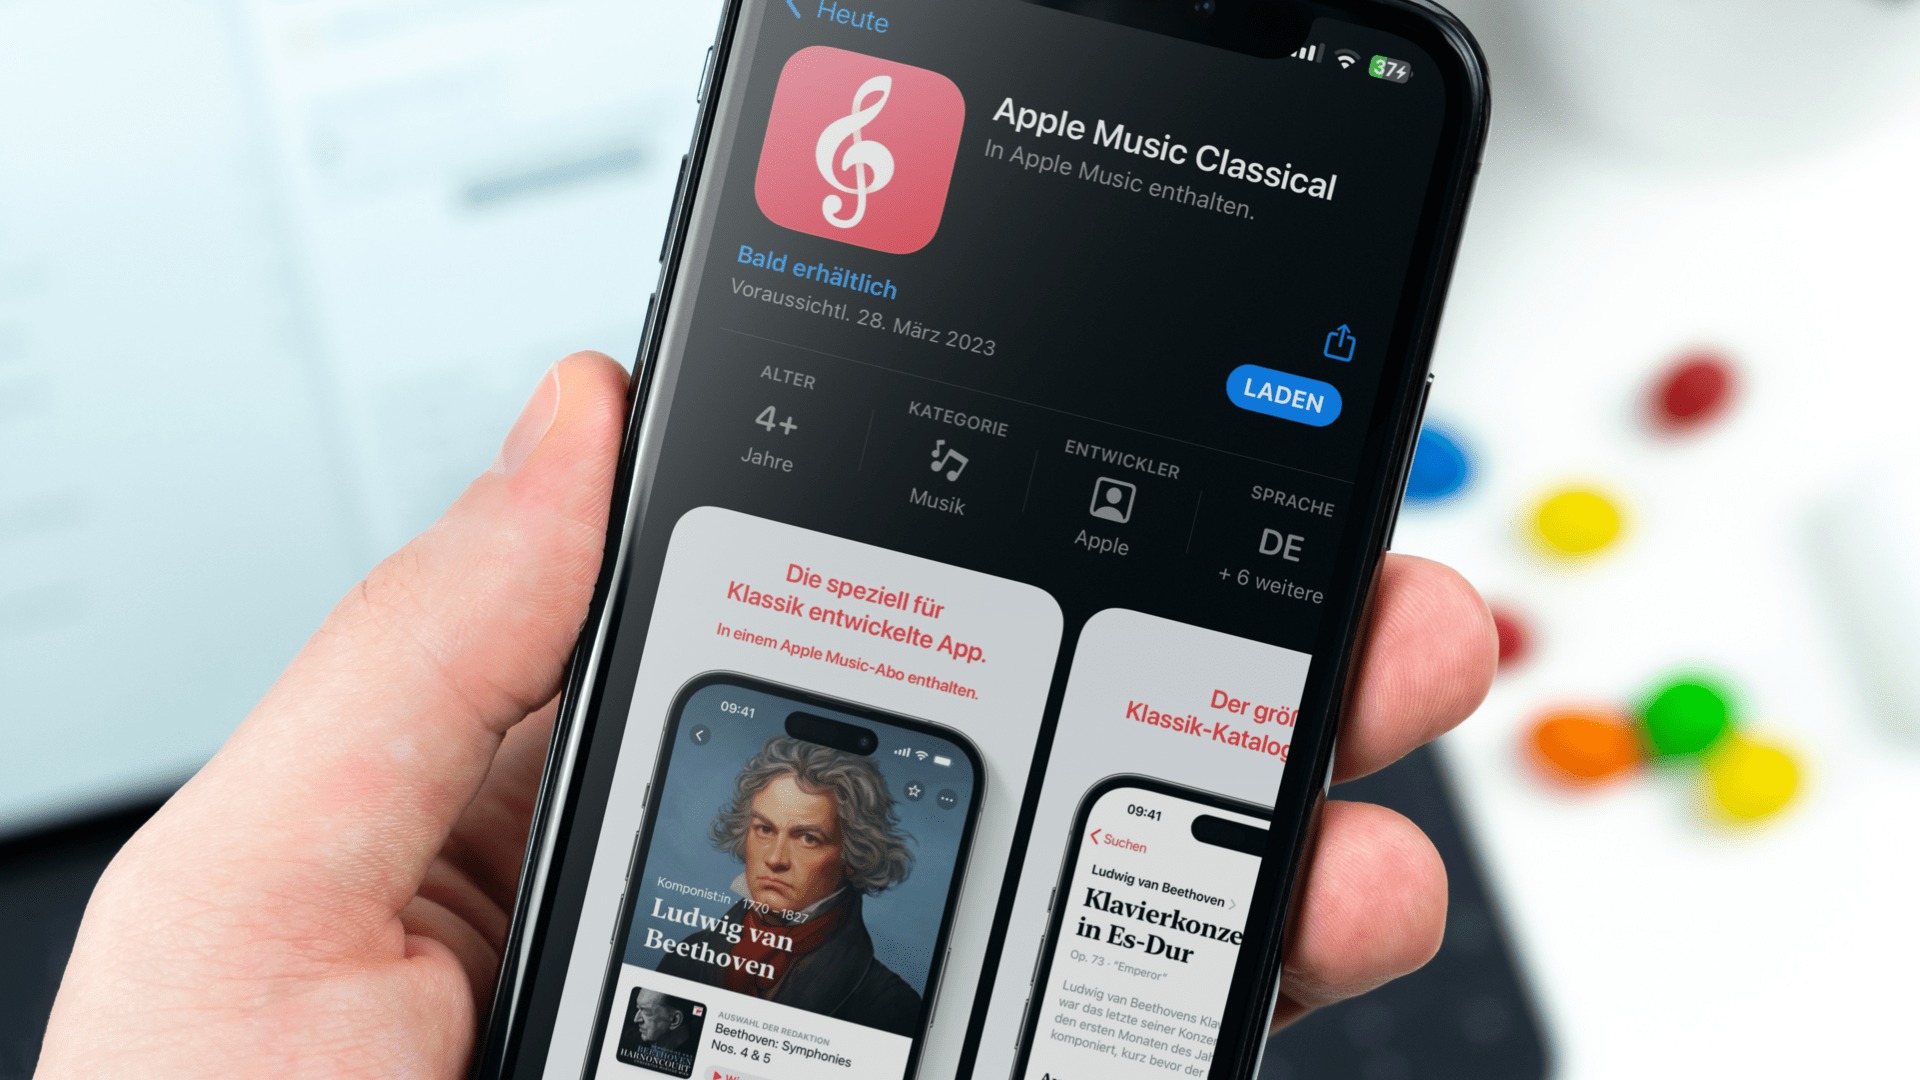 When Is Apple Music Classical Coming?